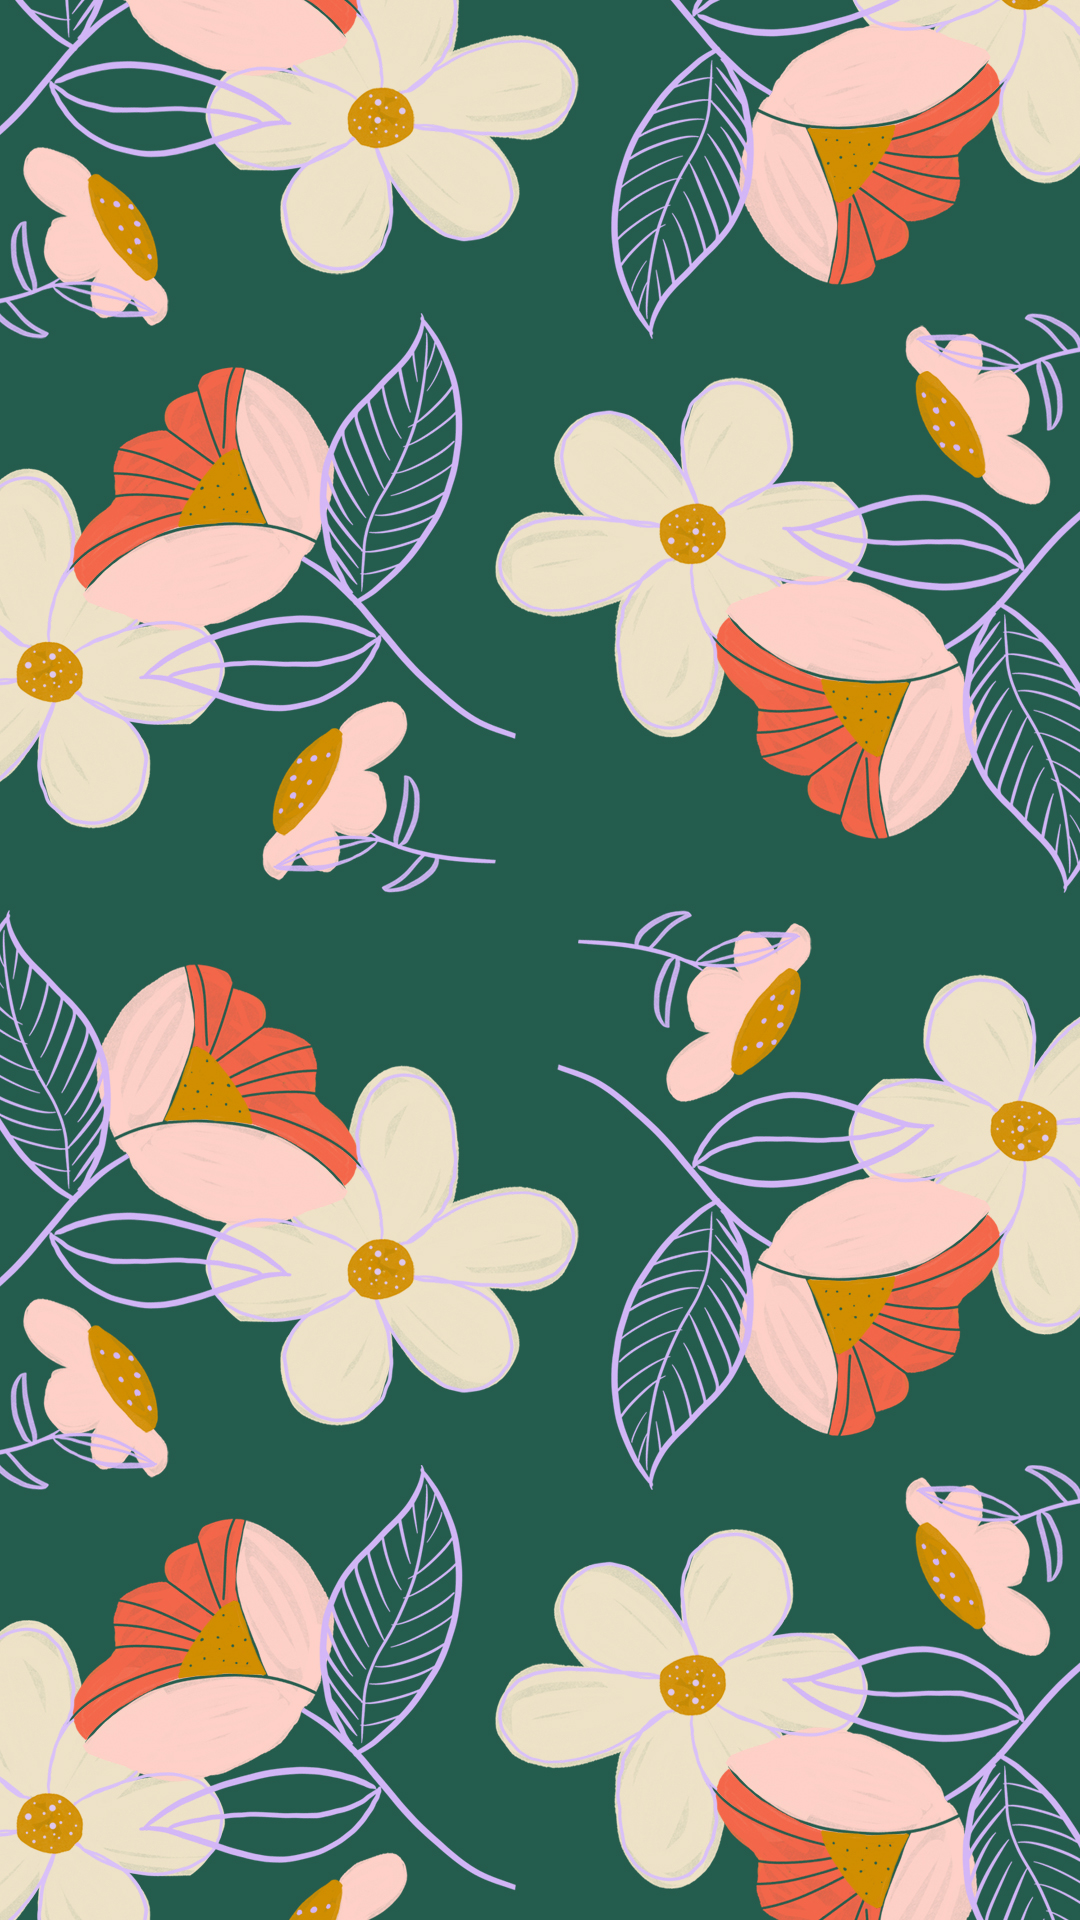 You guys have been asking, and here they are! A new round of Tech Love for your phones and computers! Download your favorite Spring Wallpapers!